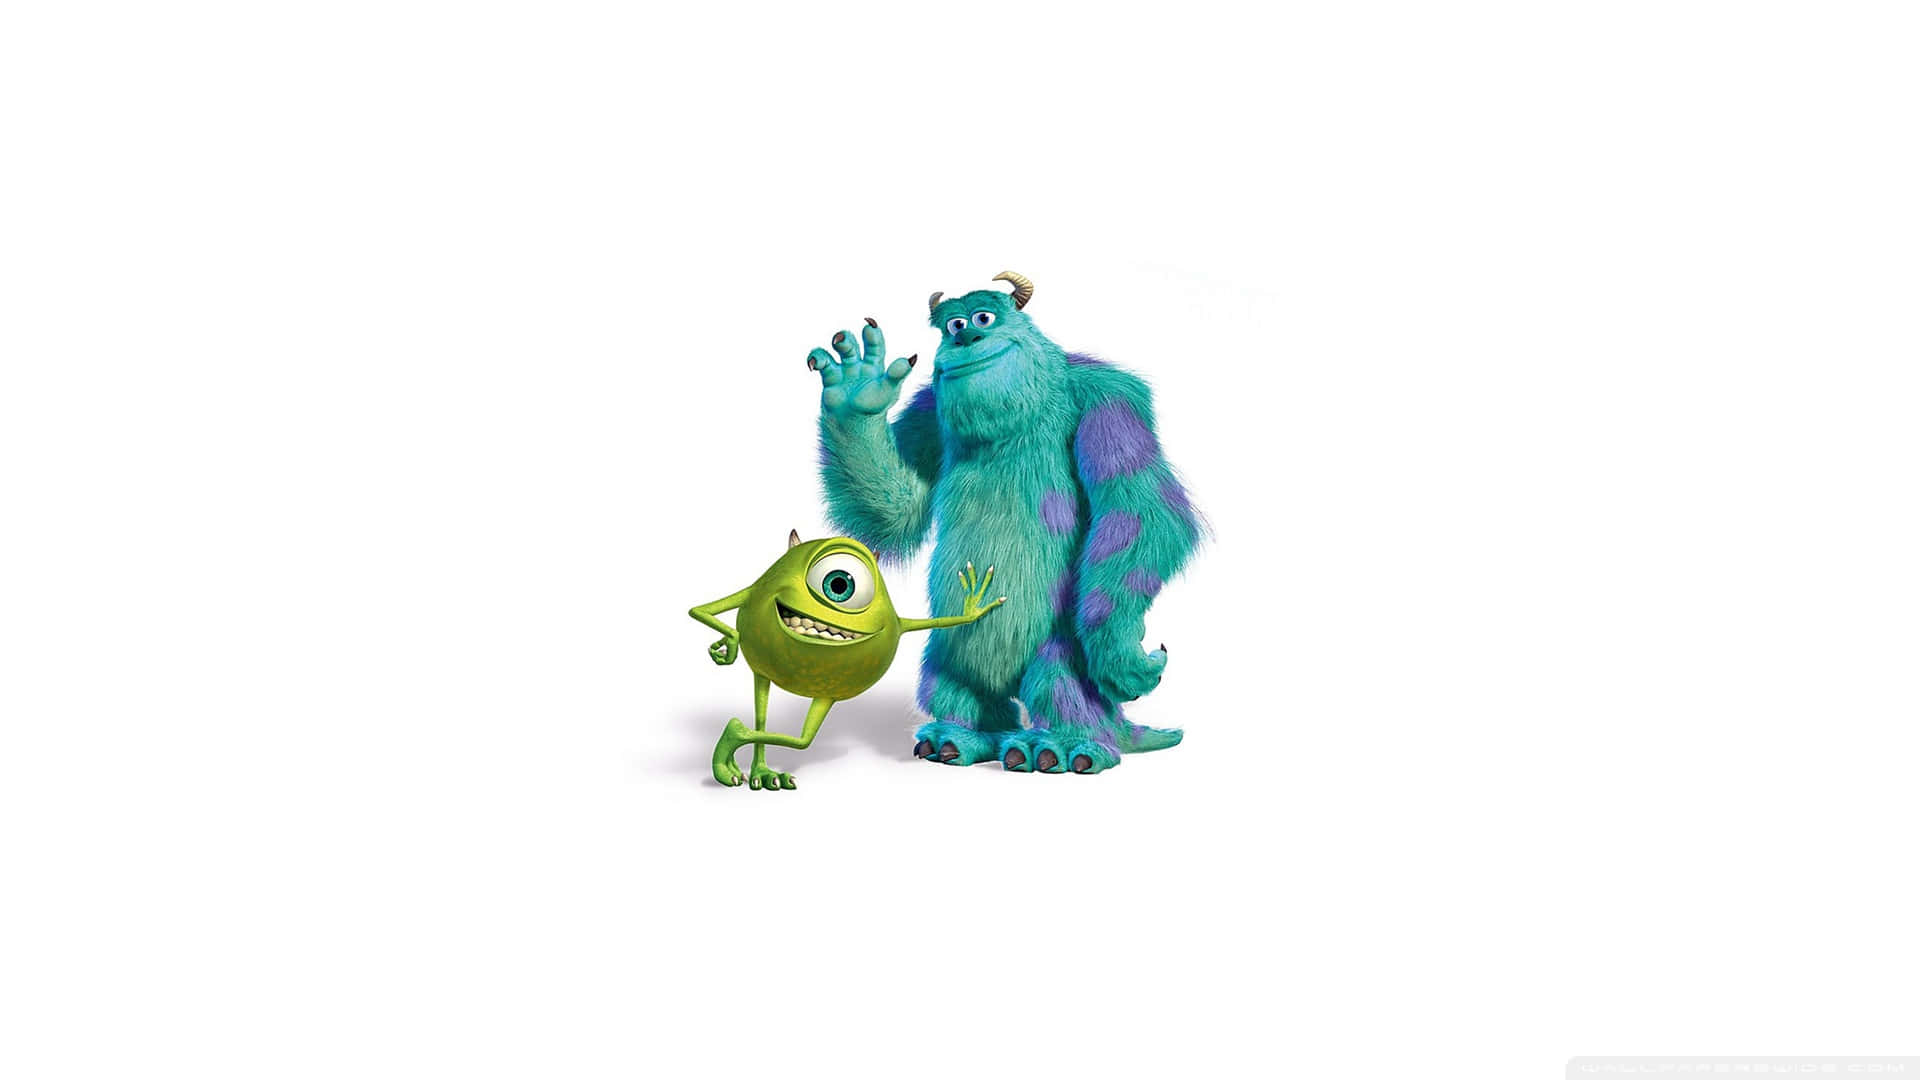 “Welcome to Monsters Inc. - Where laughter is our power!”